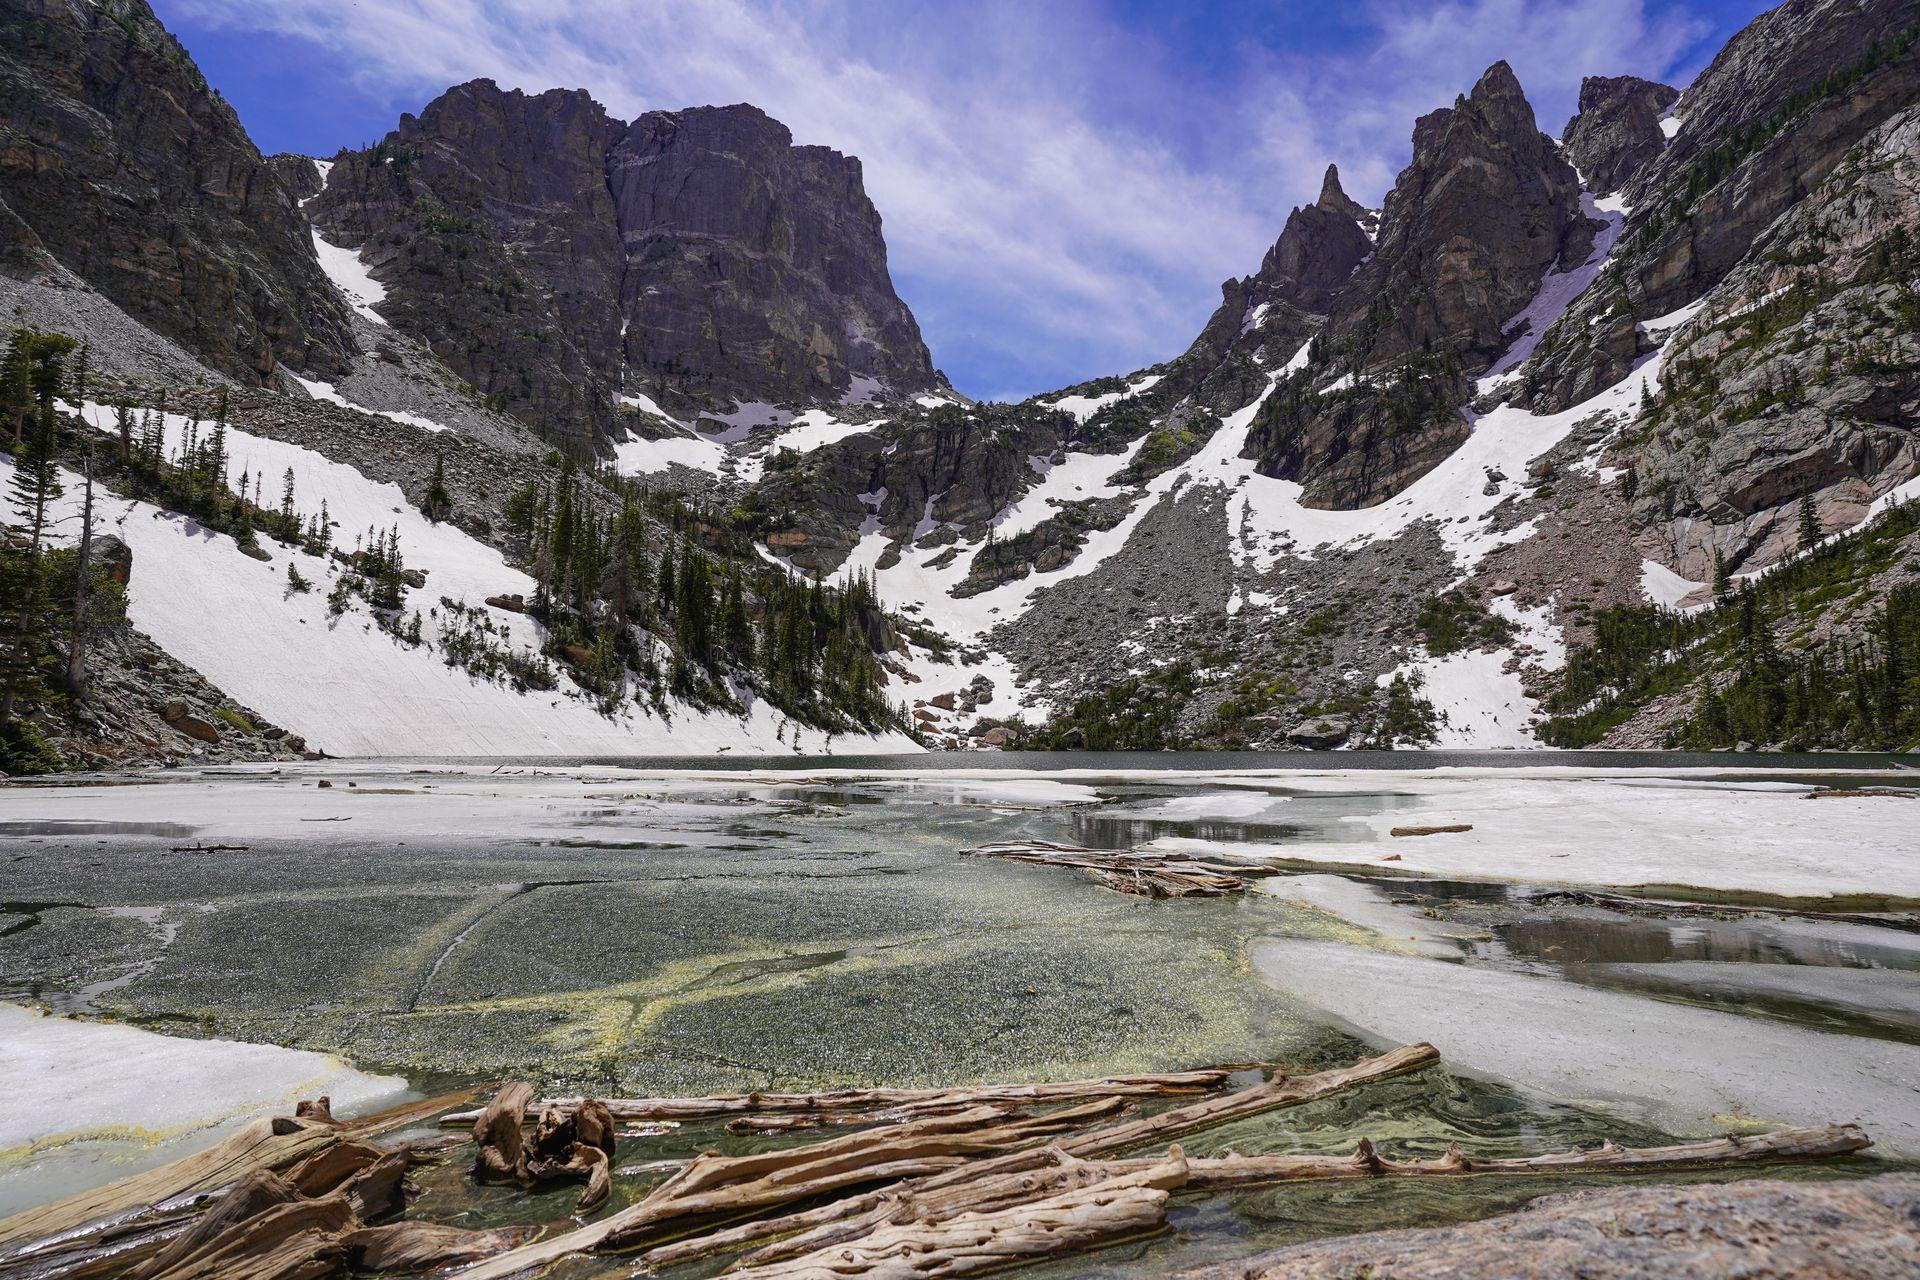 A view of Emerald Lake when it is partially frozen. Jagged, mountain peaks are located directly across the lake.